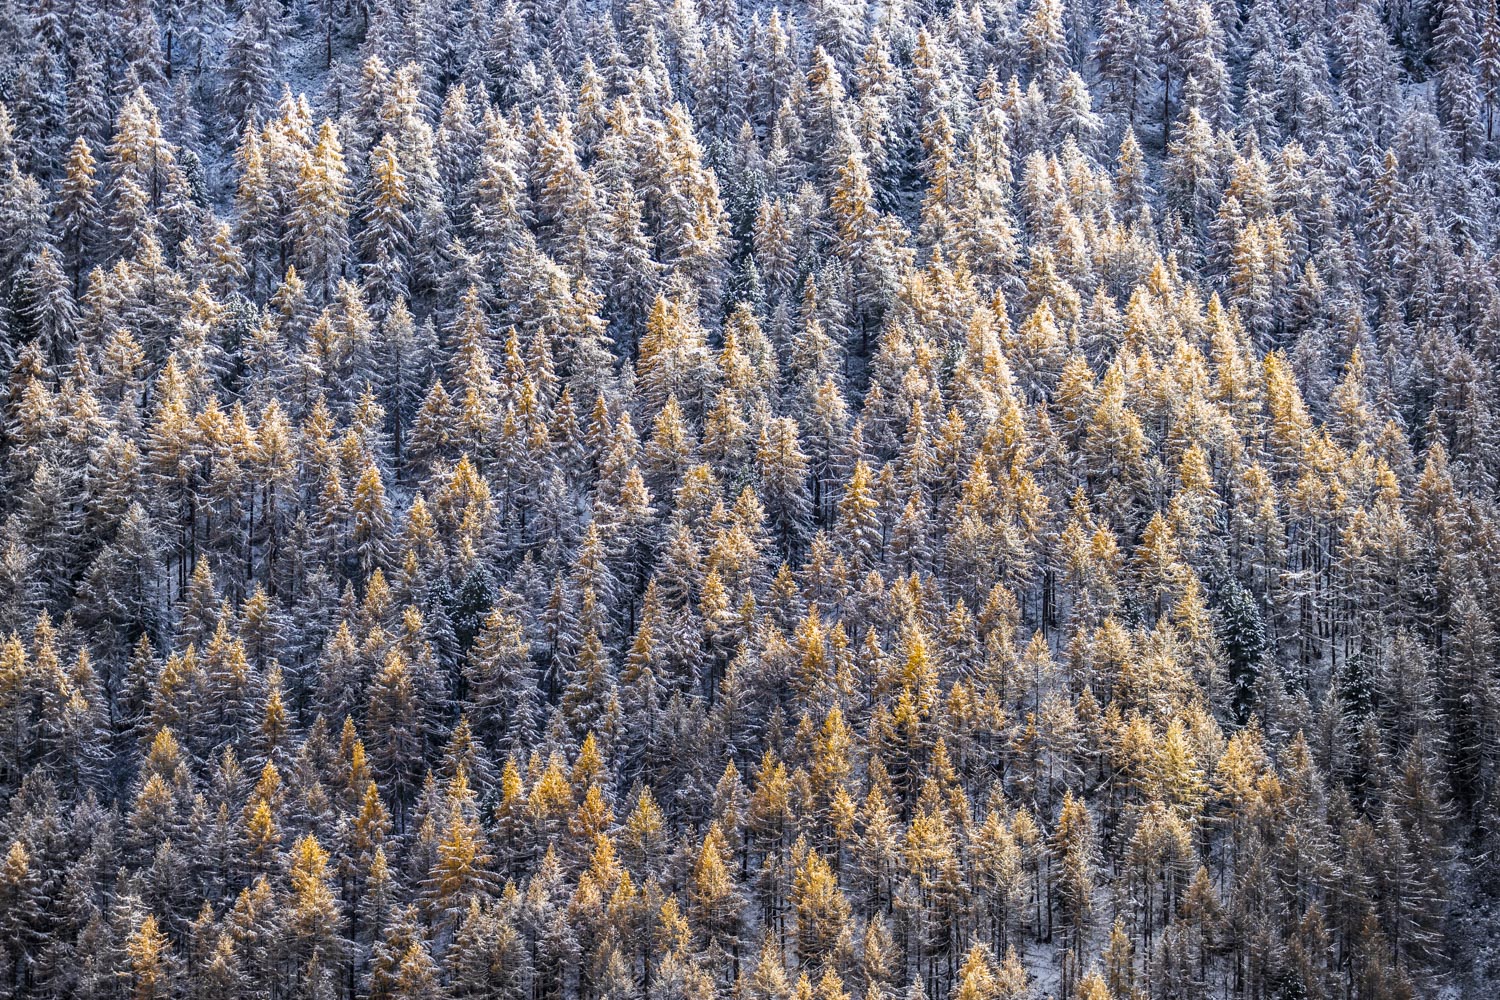 Solaise forest - Fall Colors - Larch Trees - Val d'Isère